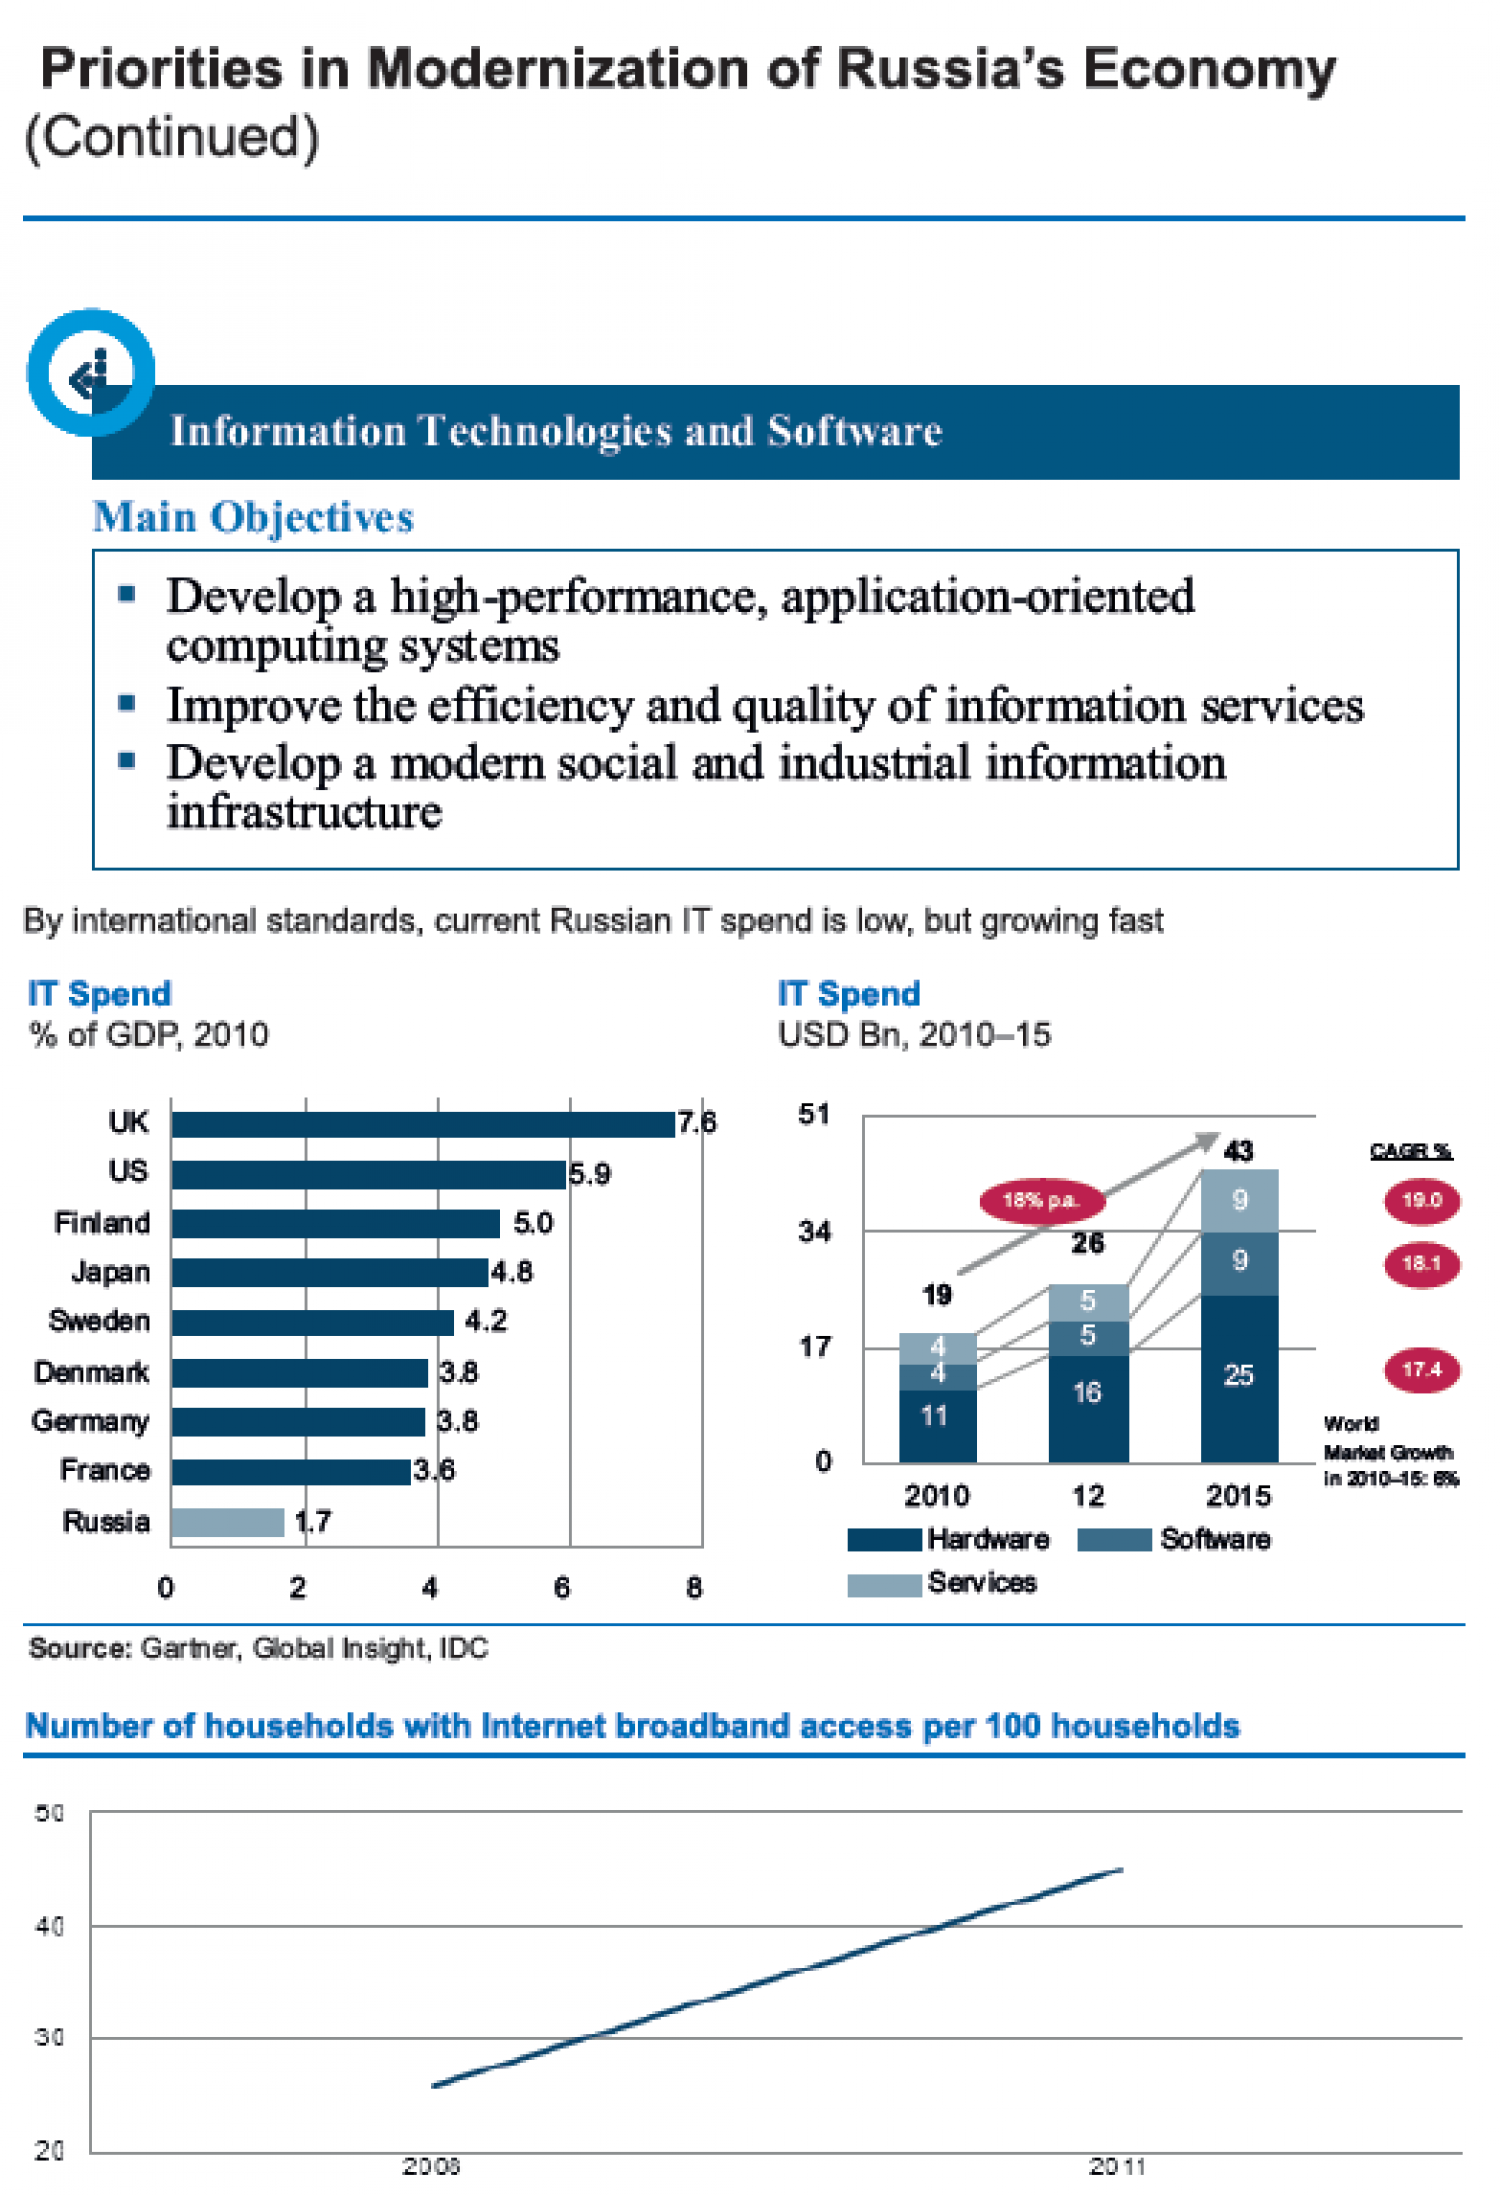 Russian Federation (INFORMATION TECHNOLOGIES & SOFTWARE) : Priorities in Modernization of Russia's Economy   Infographic